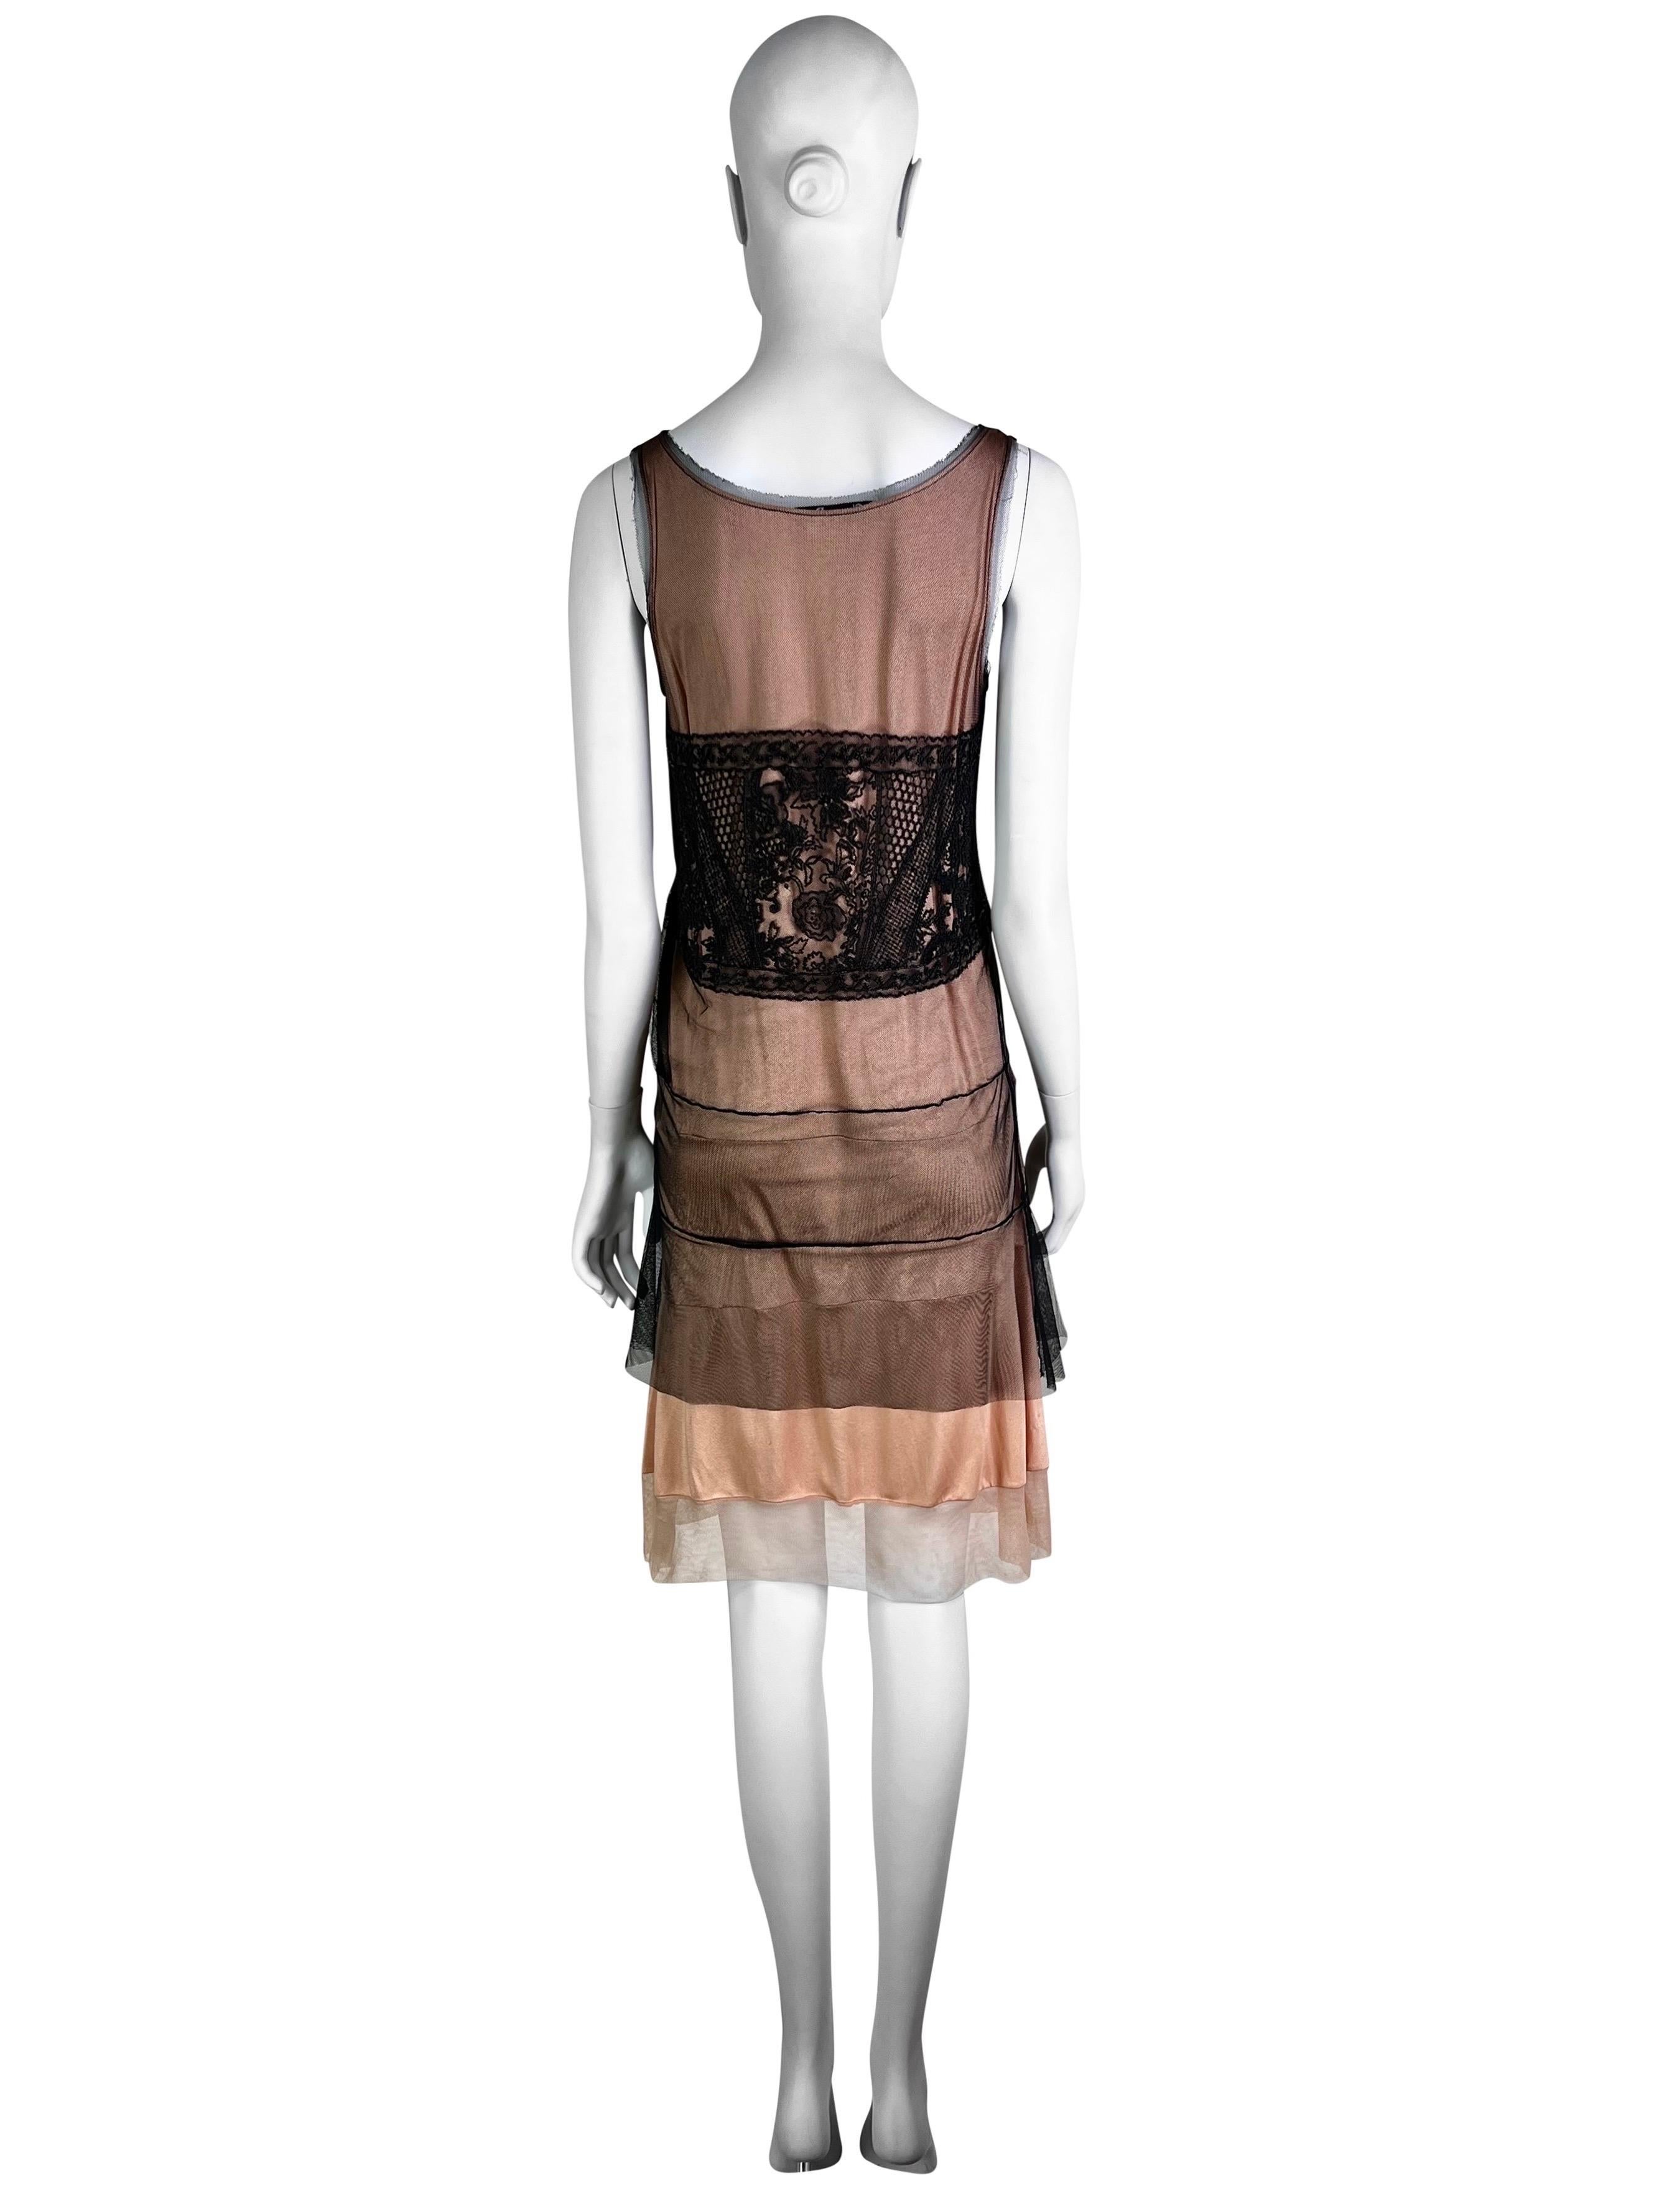 Dior by John Galliano Spring 2006 Embroidered Mesh Silk Mini Dress For Sale 5